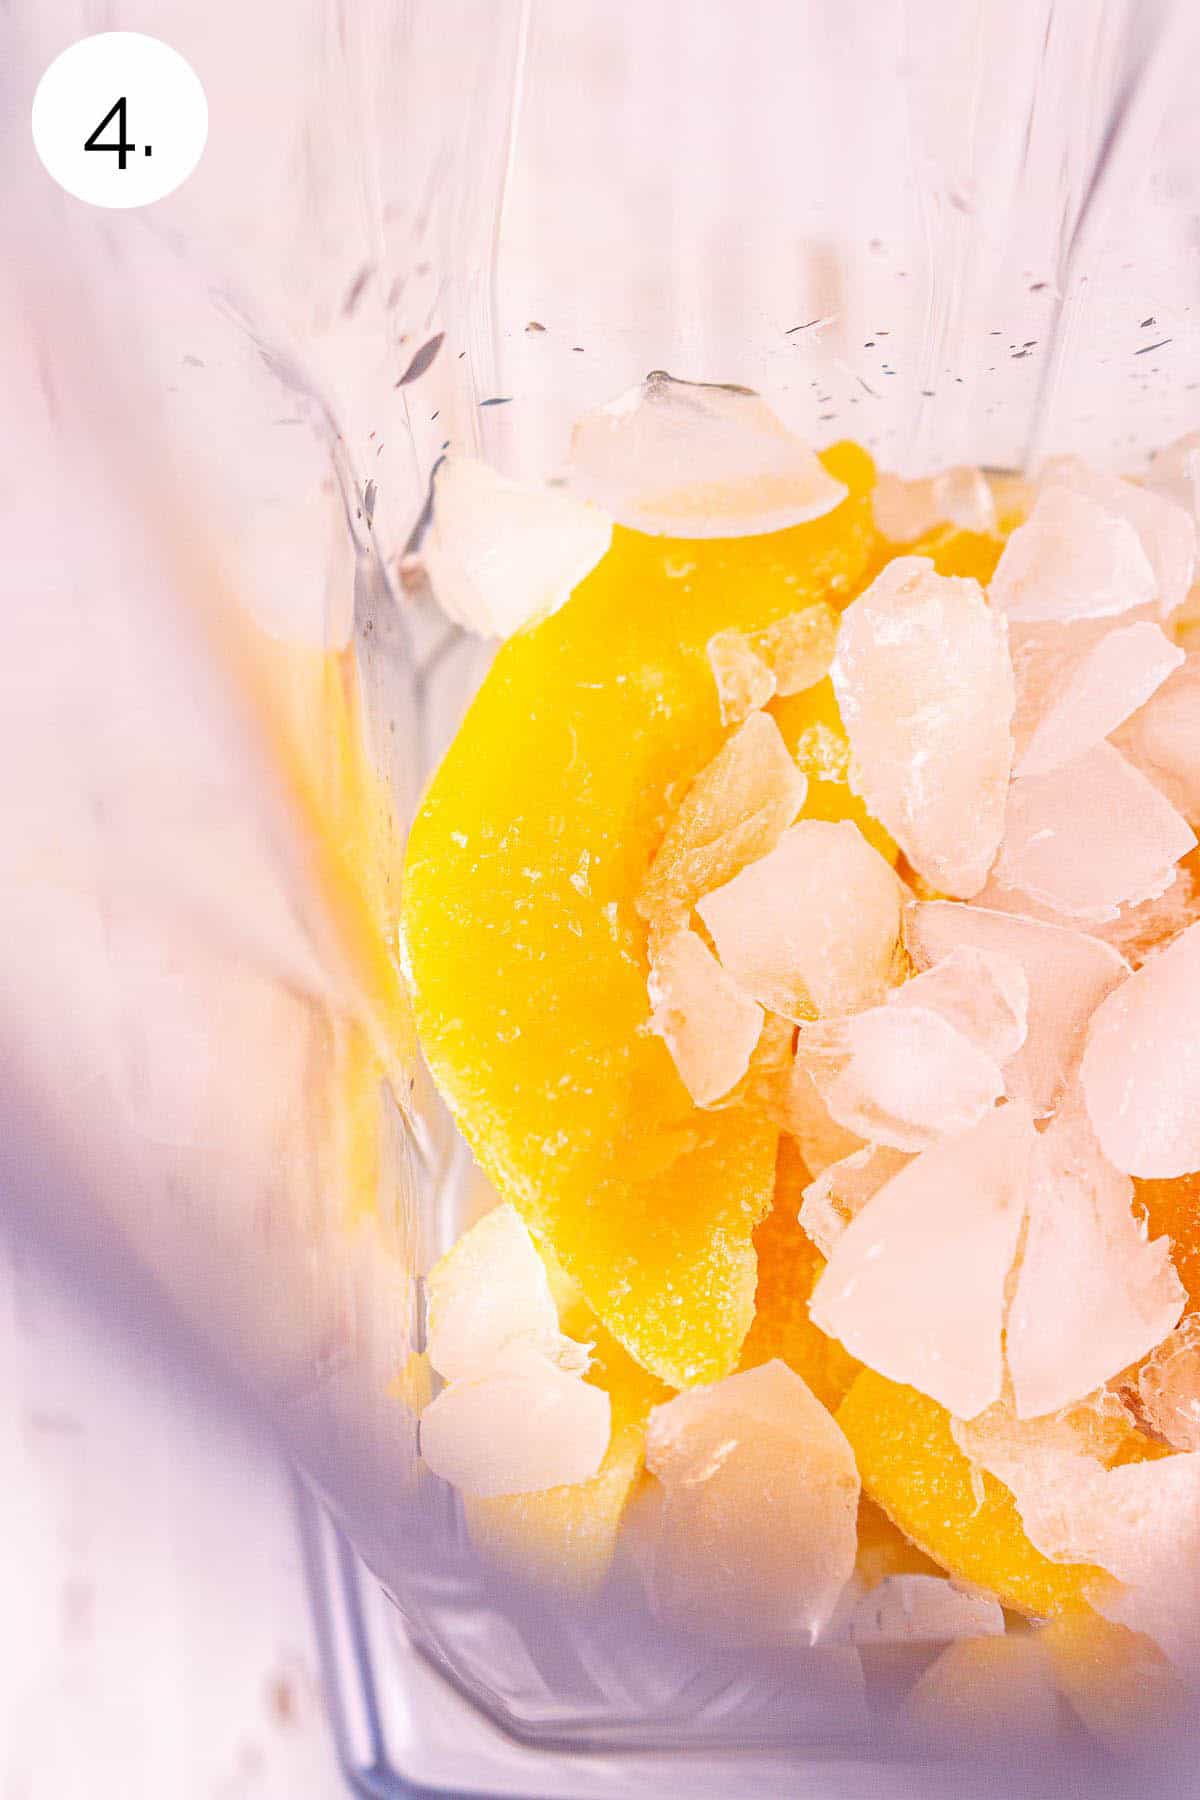 The frozen ingredients in a blender on a white wooden surface before processing until smooth.